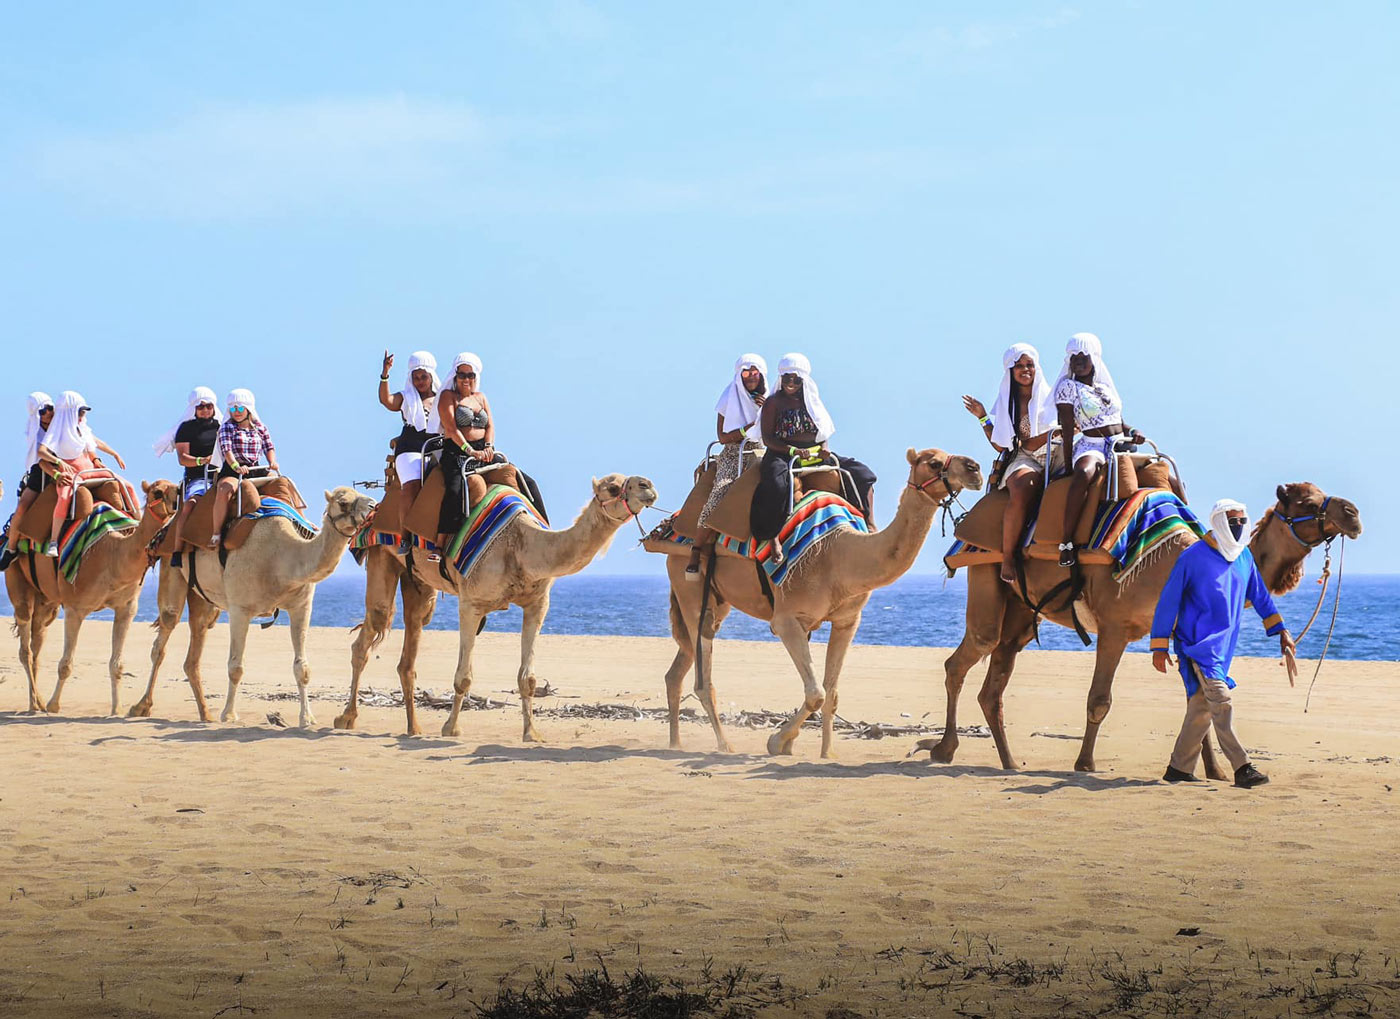 Visitors ride camels in Cabo along the beach.